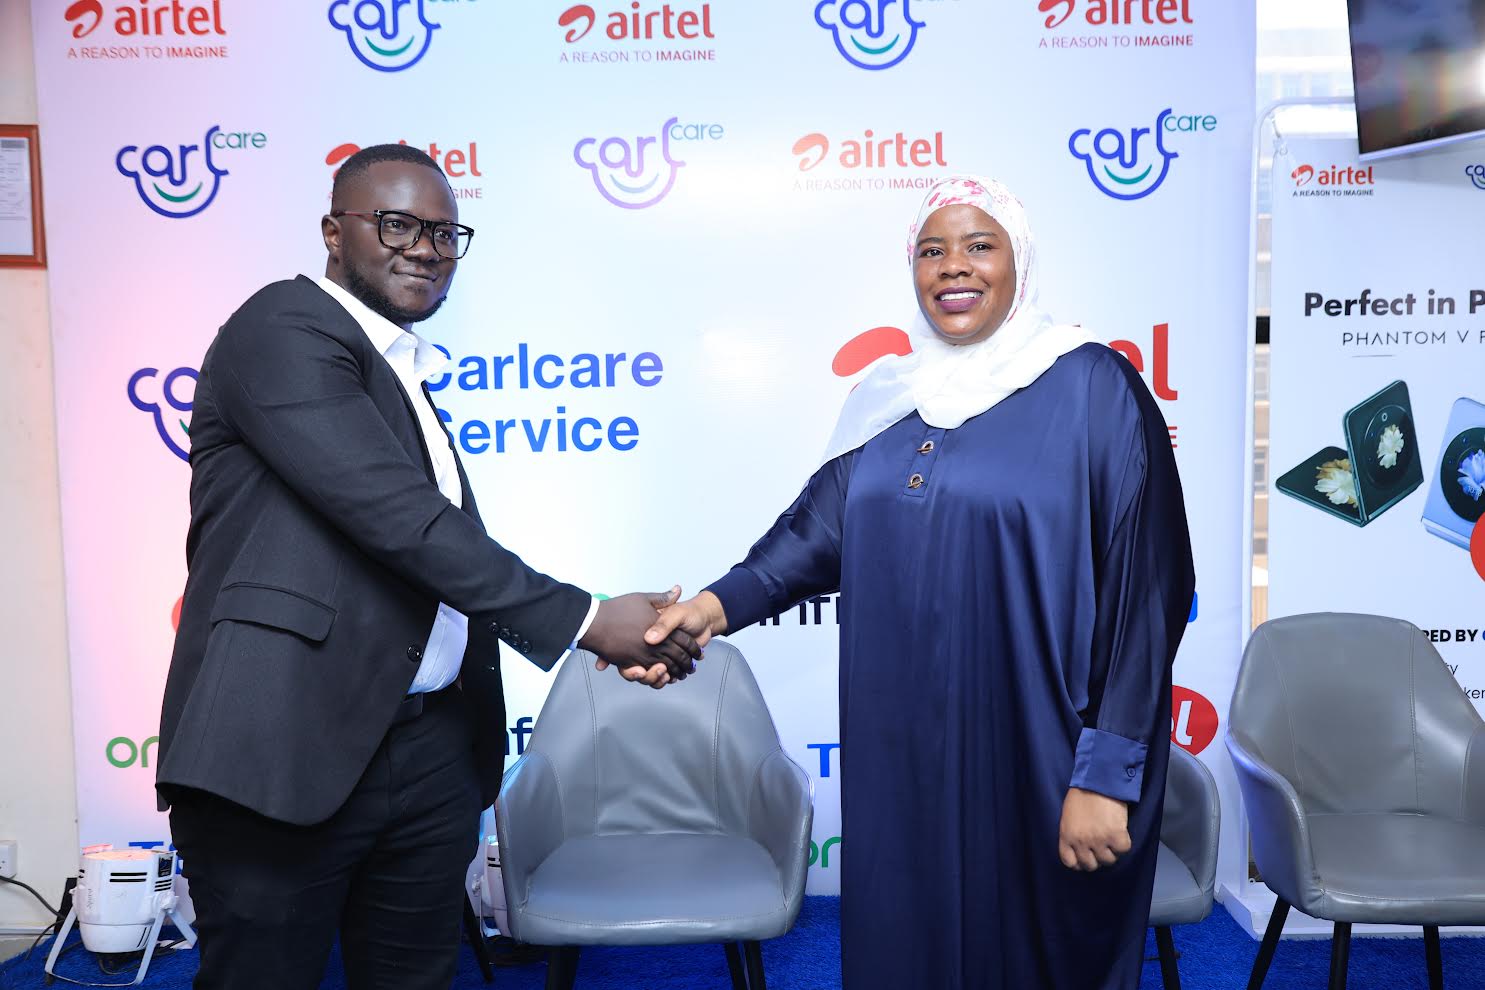 Airtel, Carlcare partner to enhance post purchase services for mobile phone users